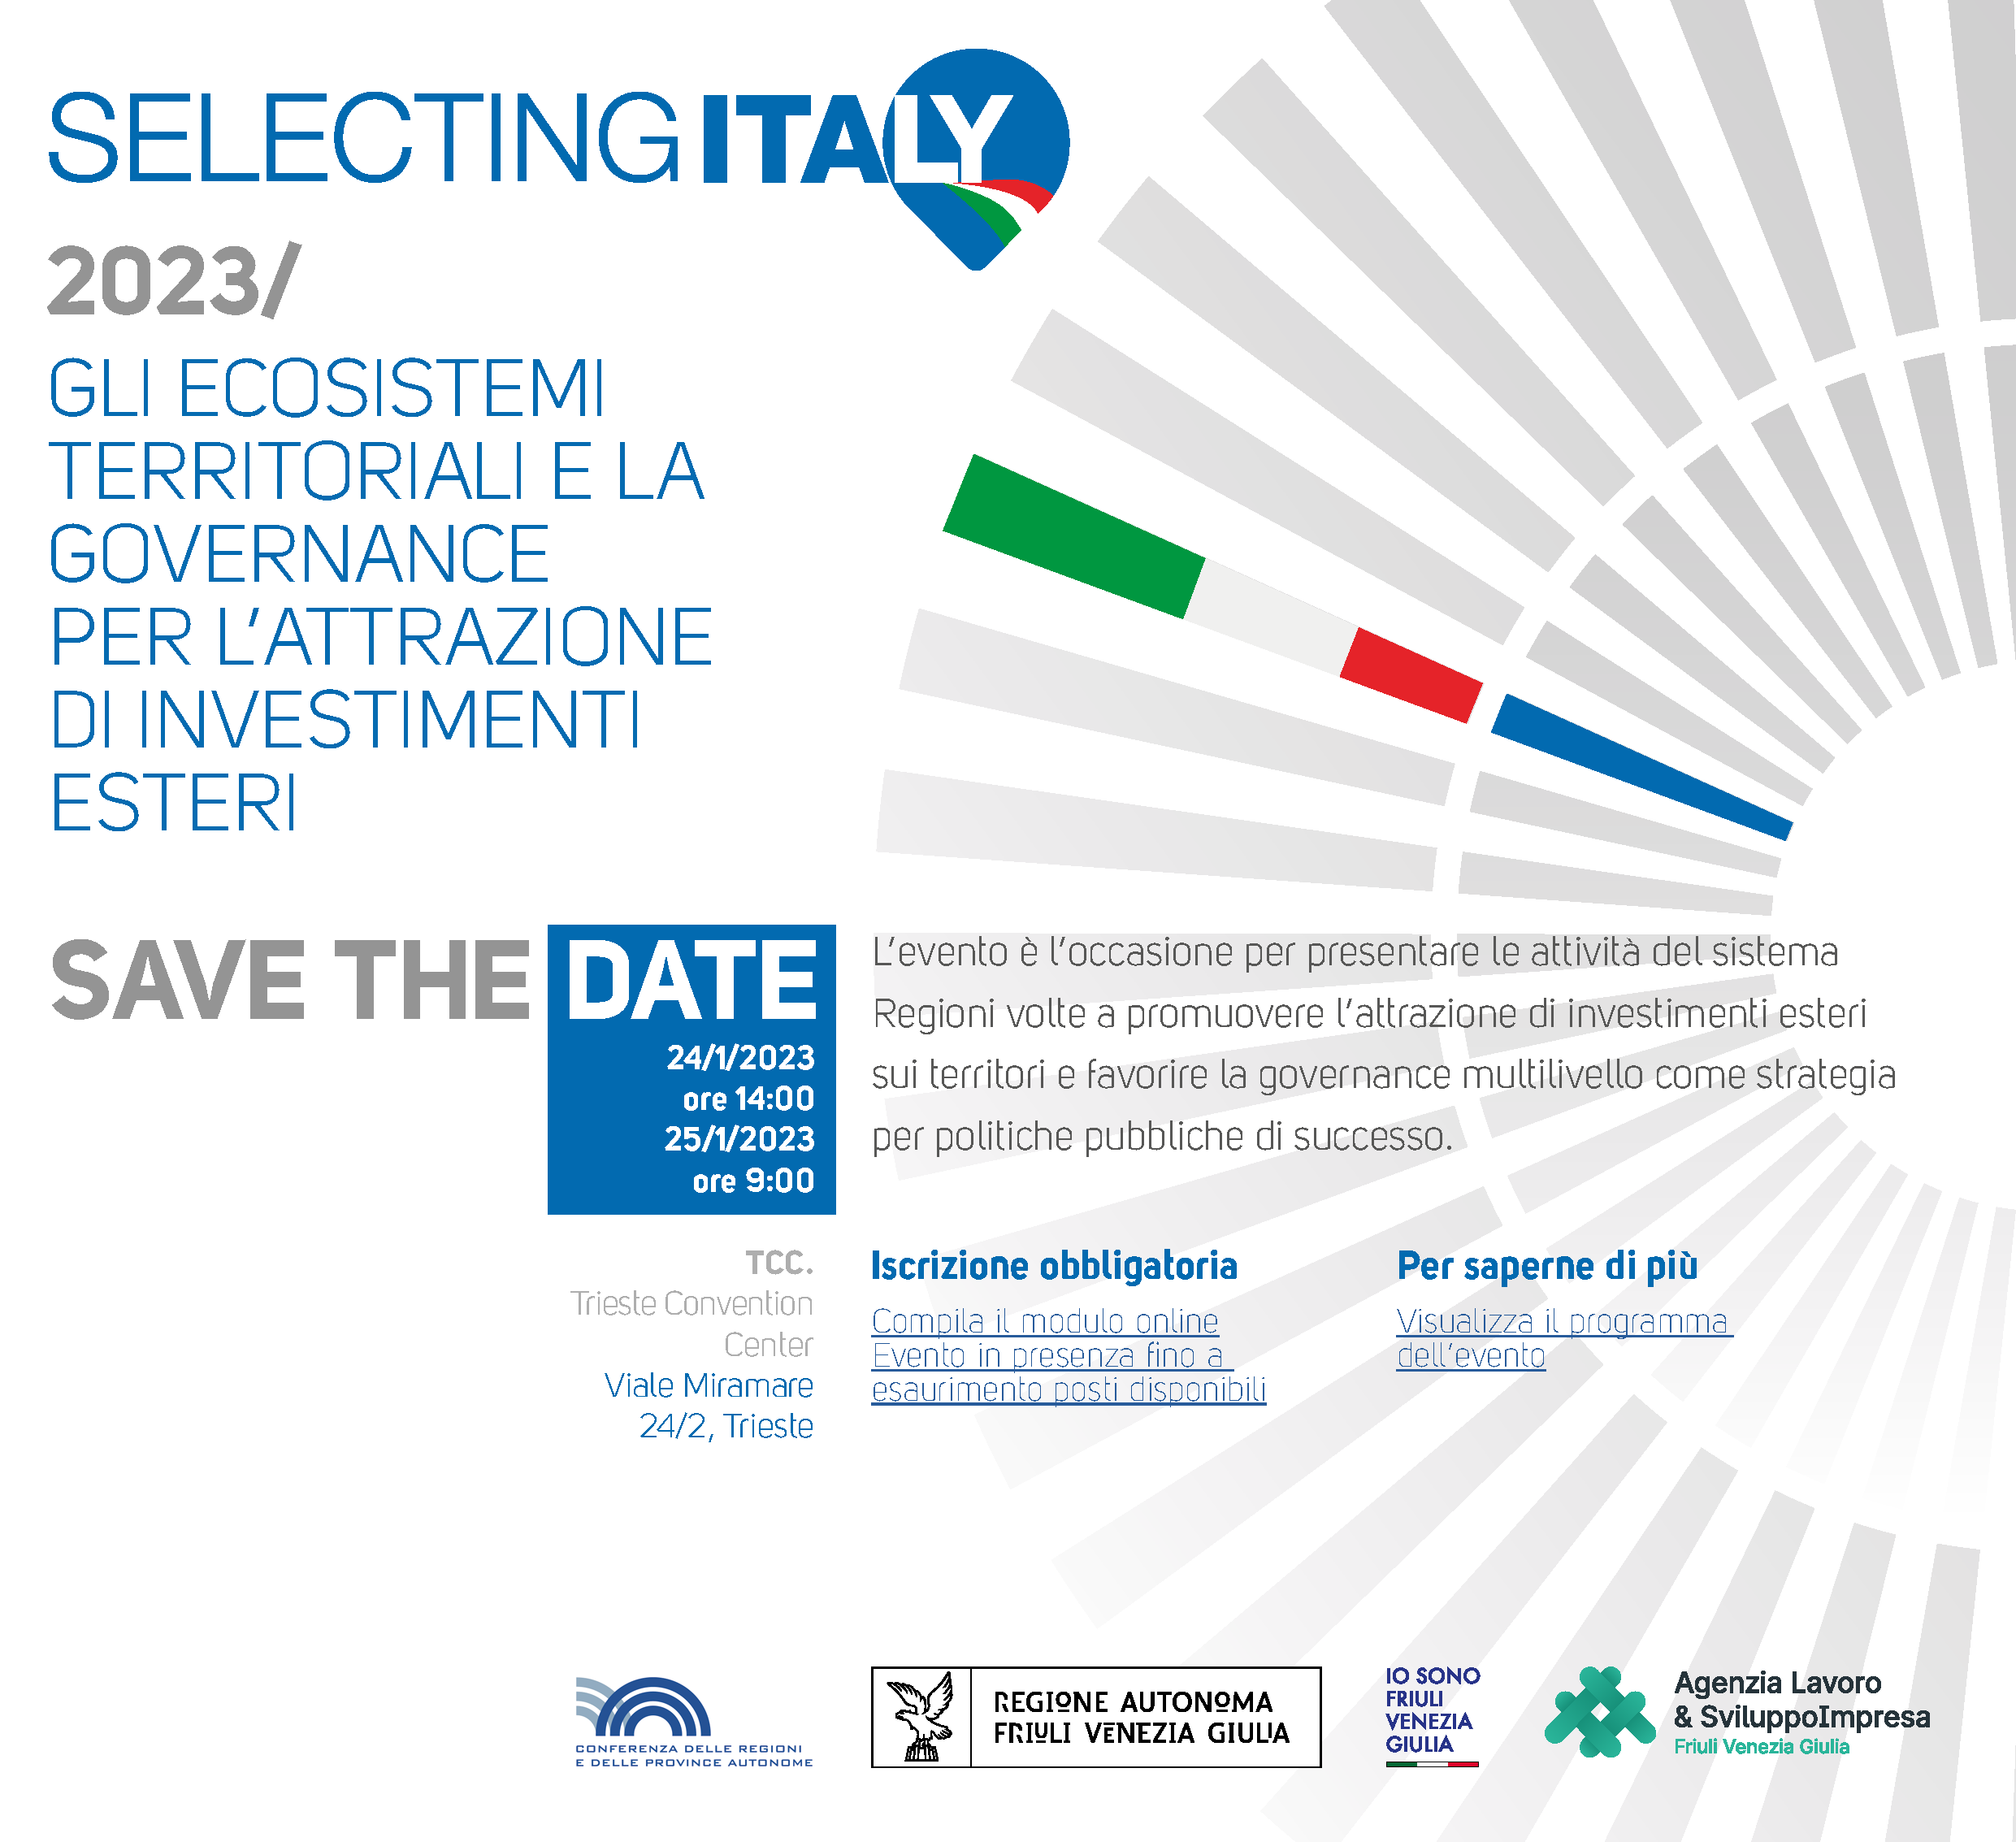 file/ELEMENTO_NEWSLETTER/25169/save_the_date_fvg.png